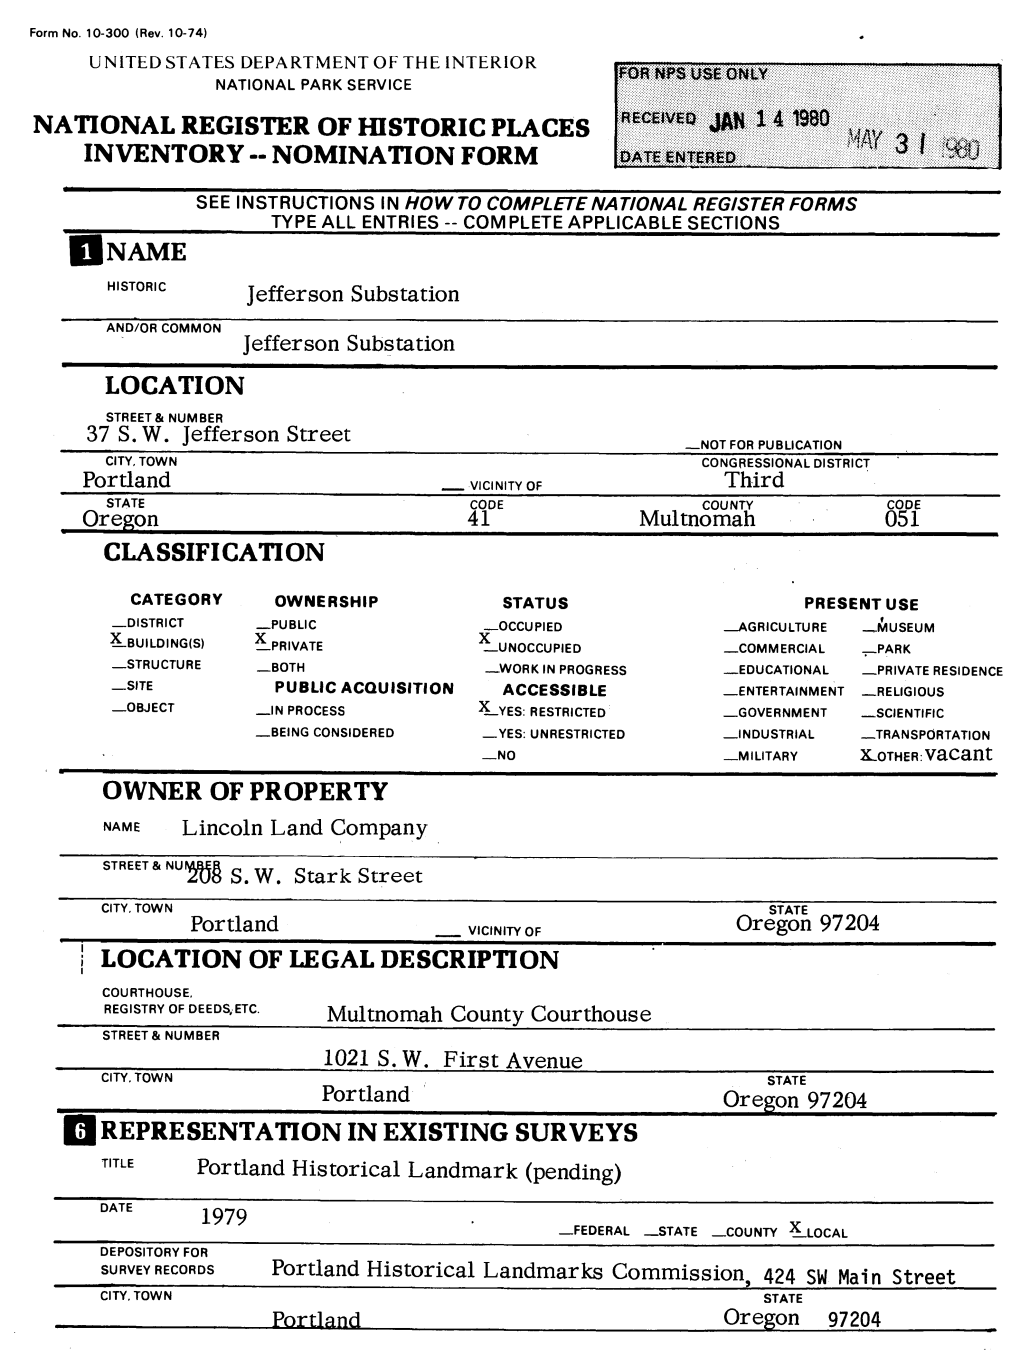 National Register of Historic Places Inventory -- Nomination Form Ii